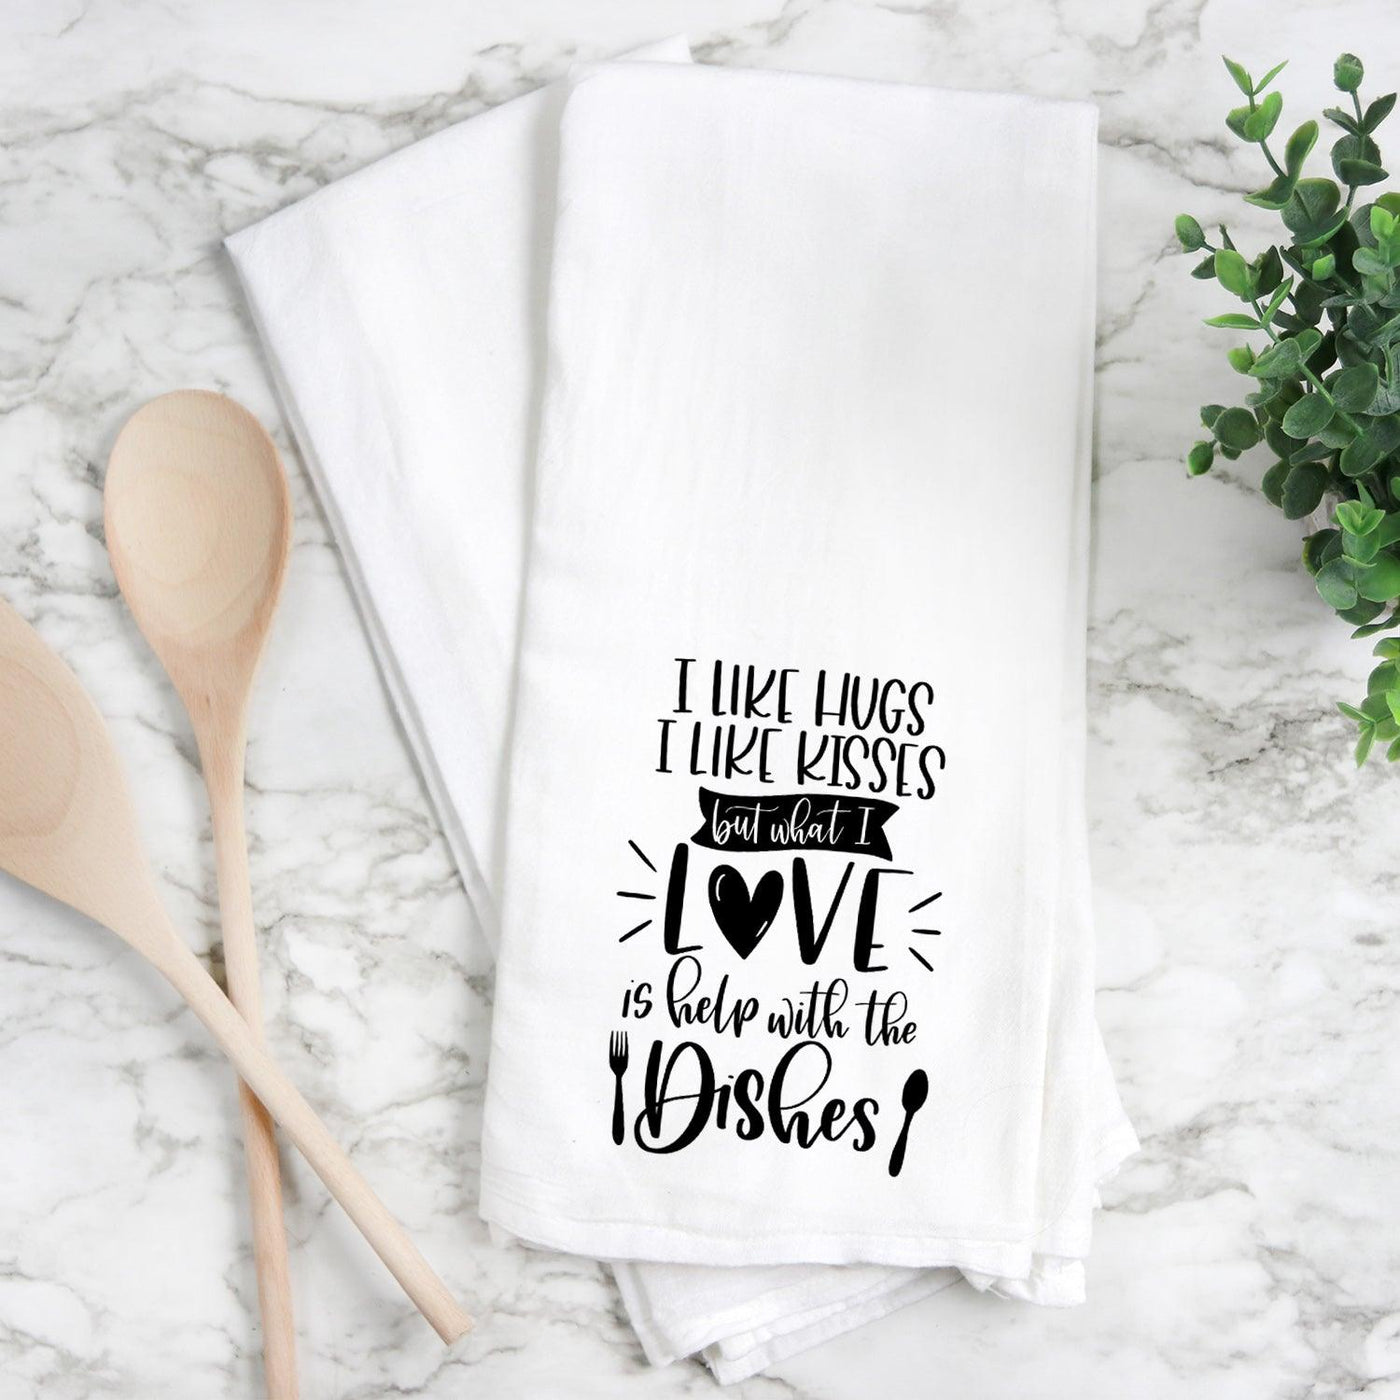 I love help with dishes - Tea Towel - Grace & Co. Designs 